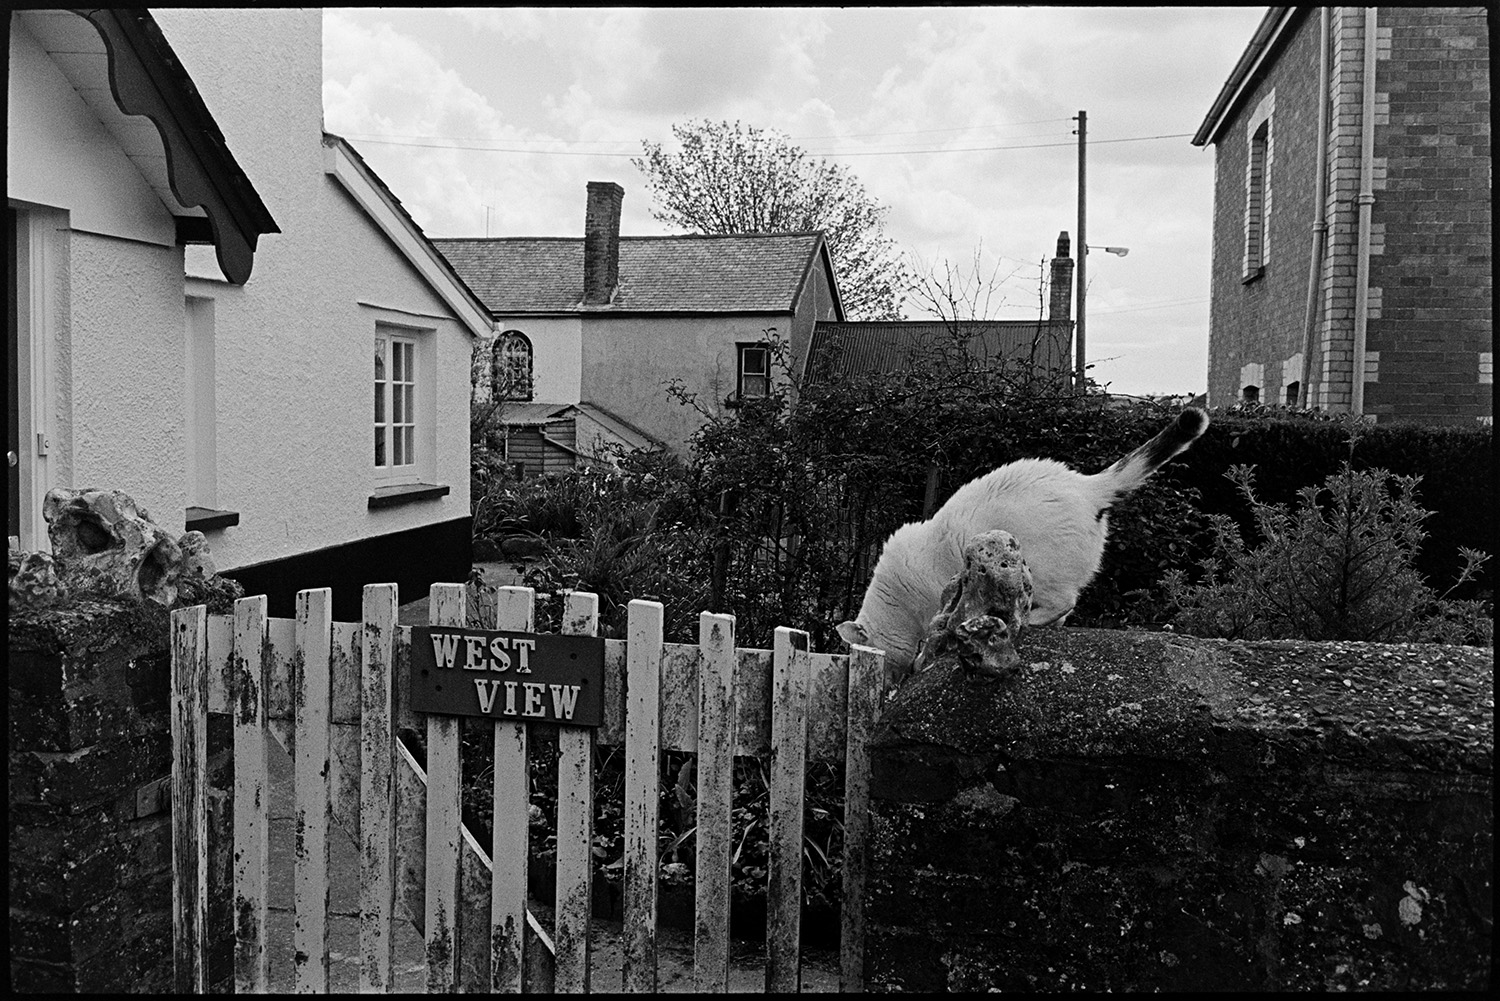 Street scenes with horse, cob and thatched cottages, porch. 
[A cat about to jump off a wall by the gate to West View house in Kings Nympton. Houses and garden scan be seen in the background.]